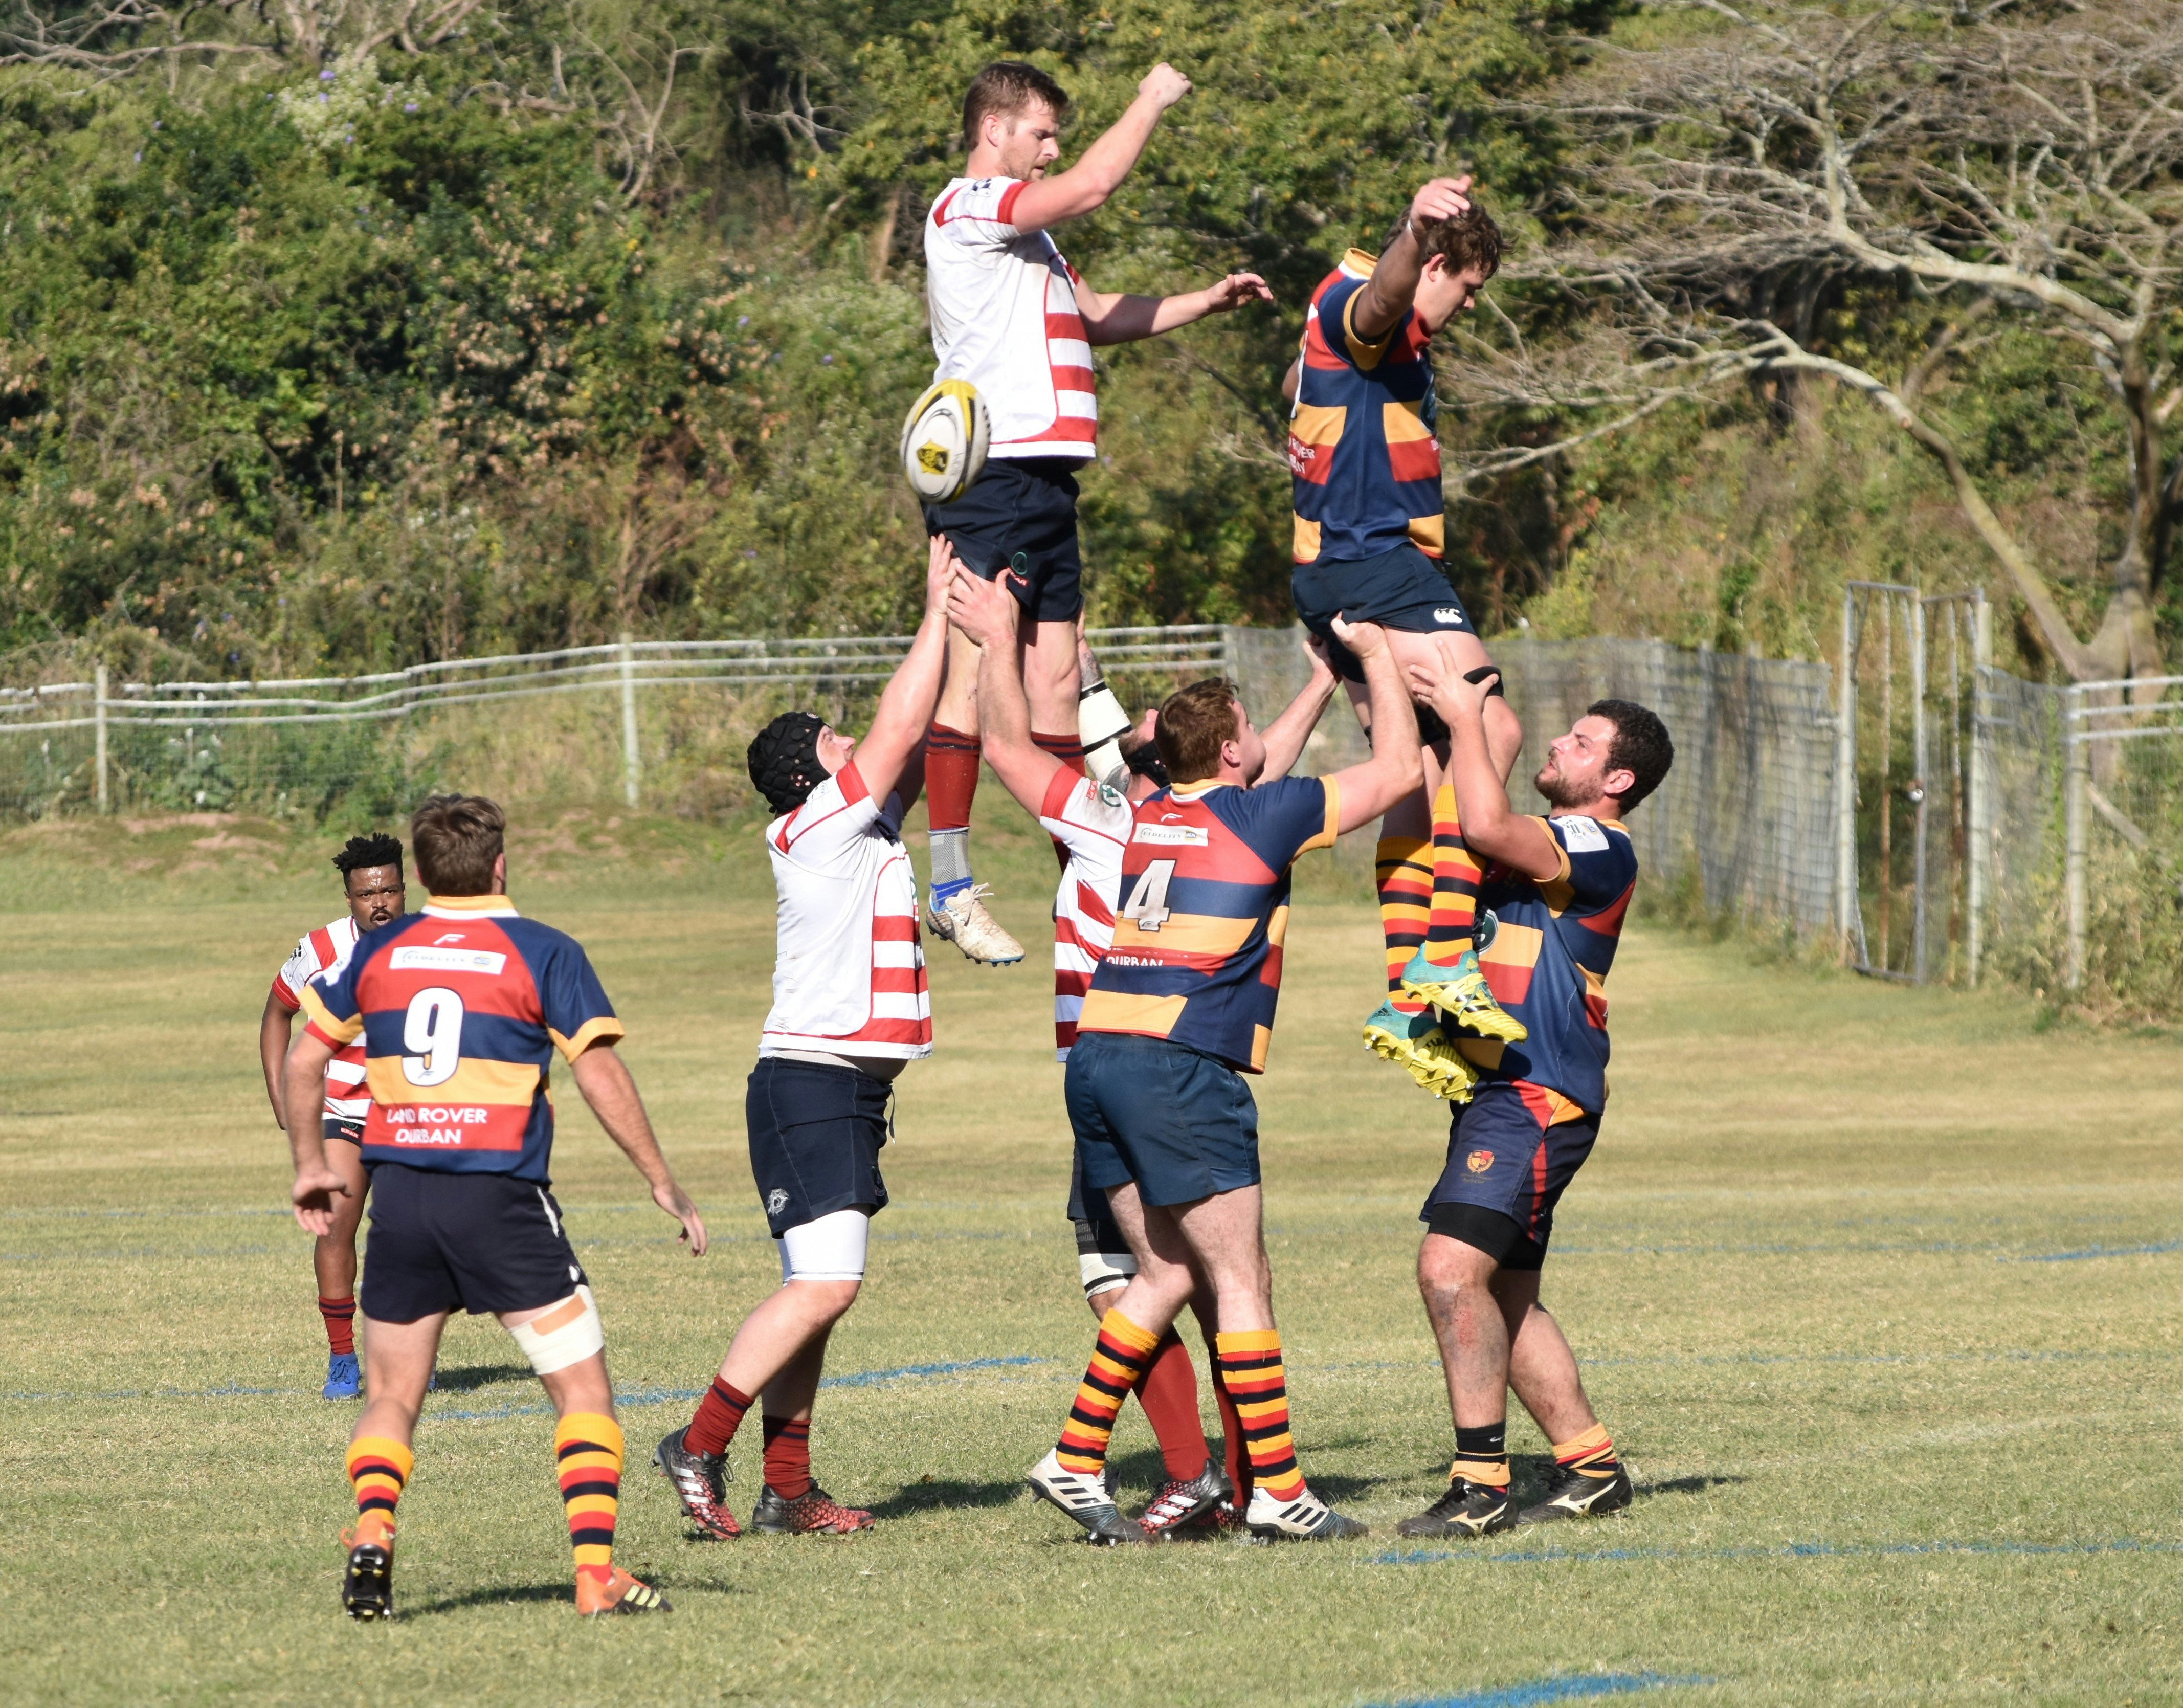 Club rugby, group of young men, in the line-out catching the ball. Locks lifting, on a sunny afternoon in Westville, Kwazulu Natal.